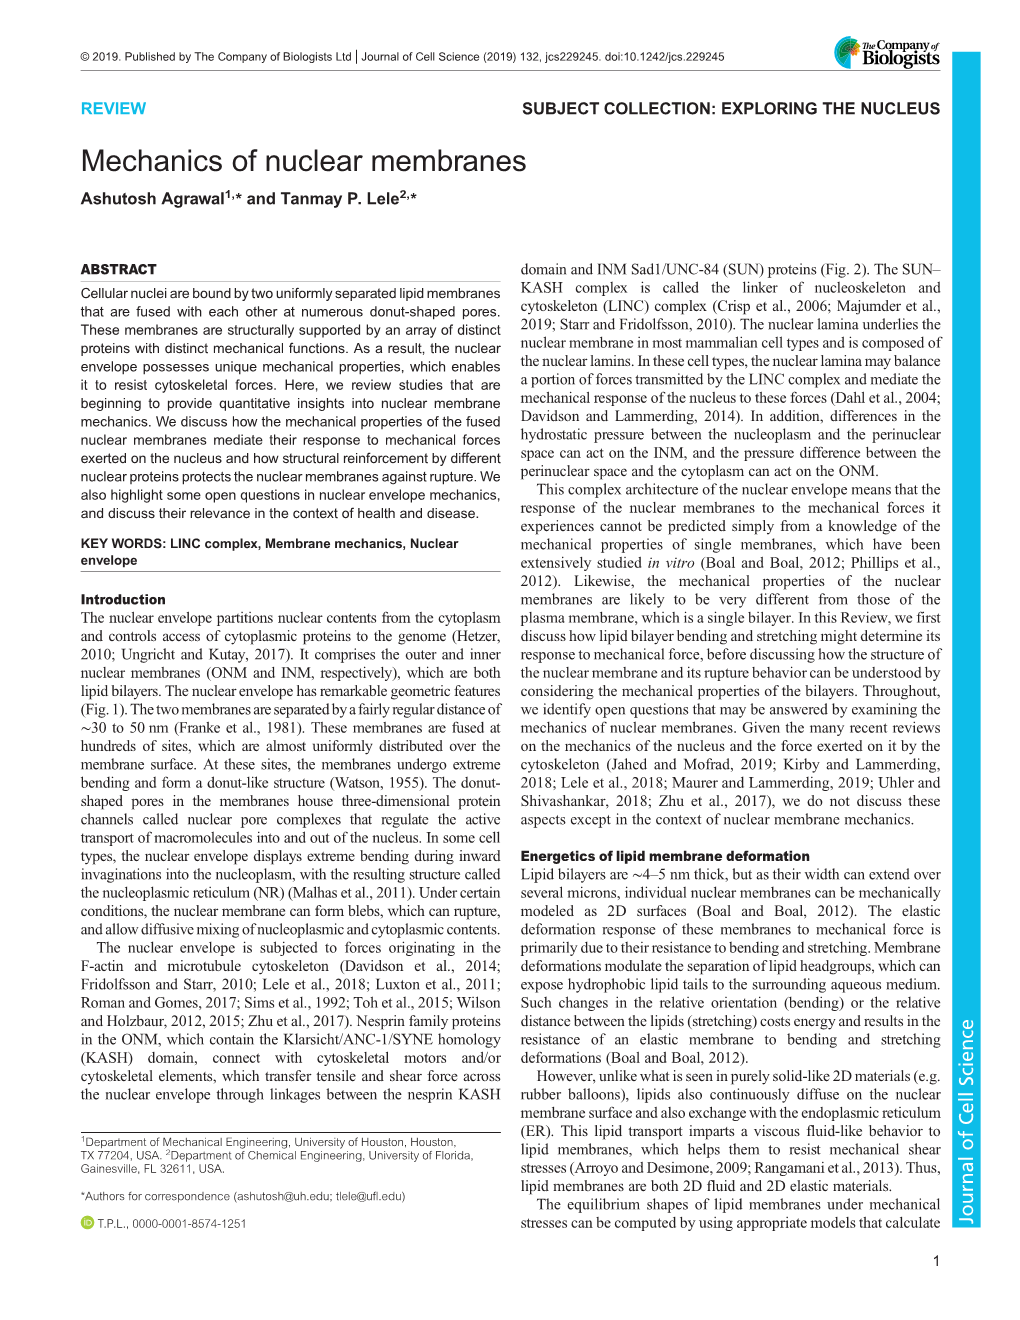 Mechanics of Nuclear Membranes Ashutosh Agrawal1,* and Tanmay P